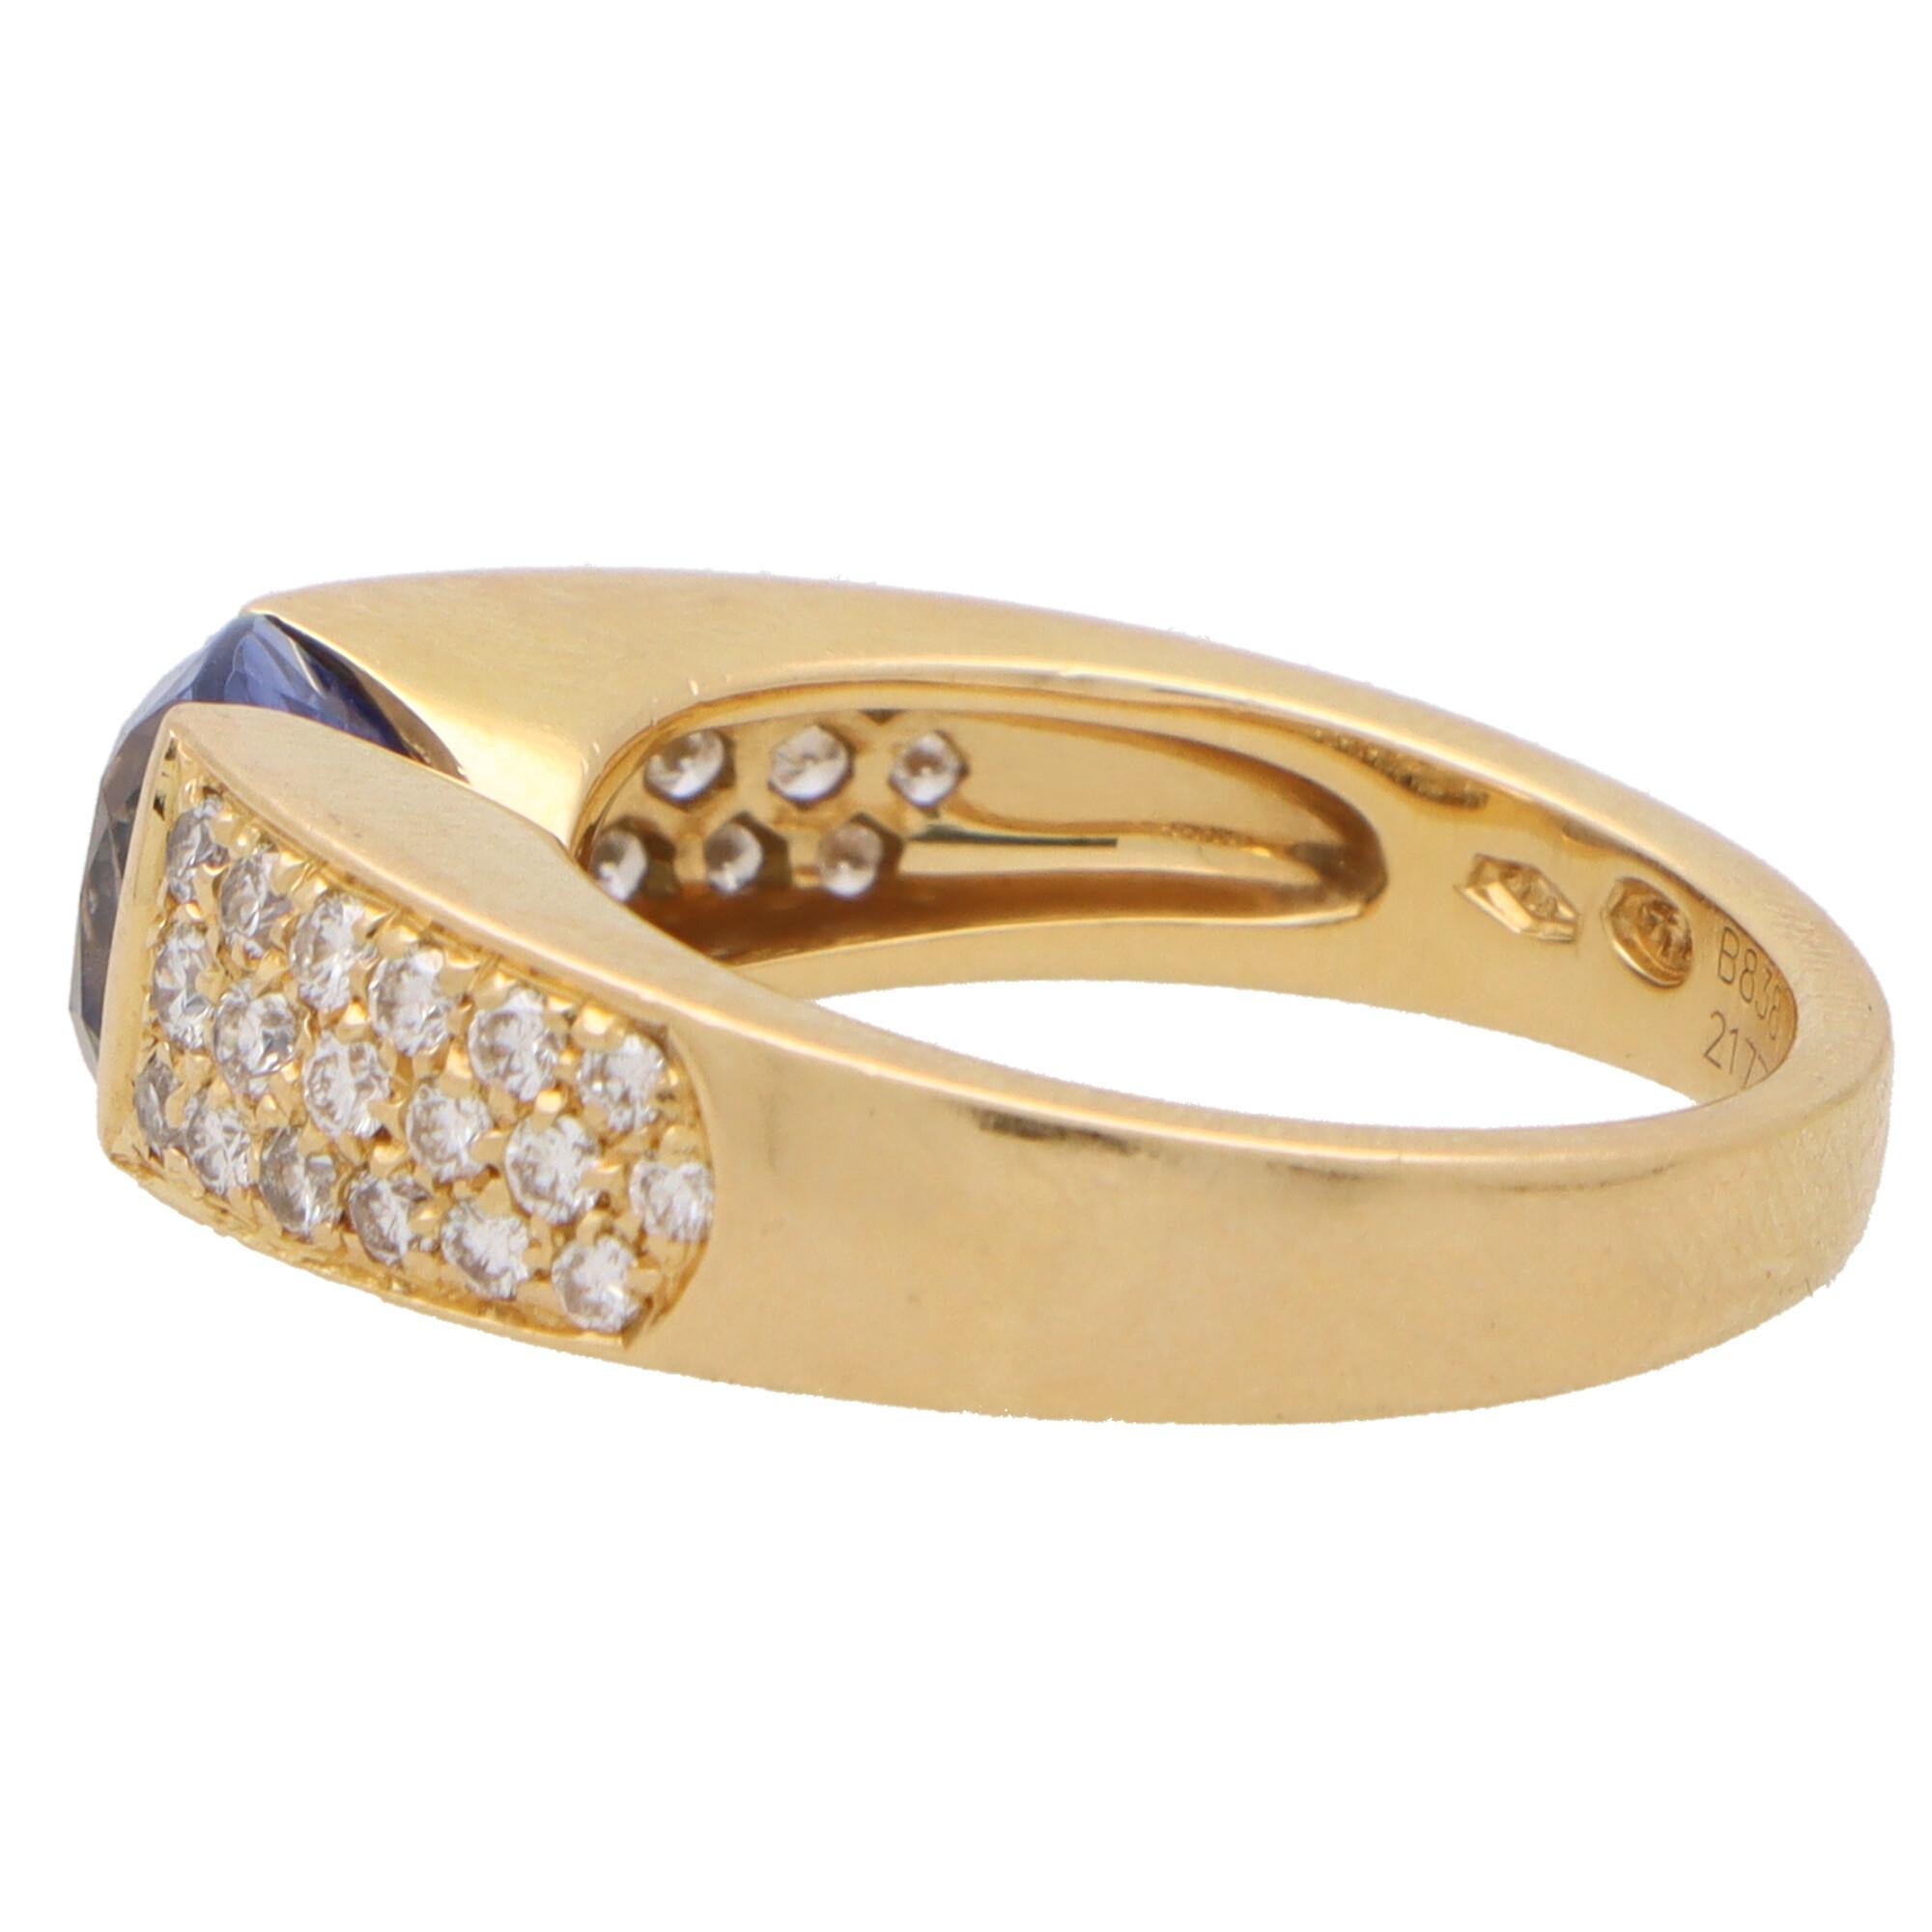 A beautiful vintage Boucheron sapphire and diamond ring set in 18k yellow gold.

The ring is designed in a slightly raised bombé design and is centrally set with a bezel-set cushion cut blue sapphire. To either side of the sapphire are raised bombé